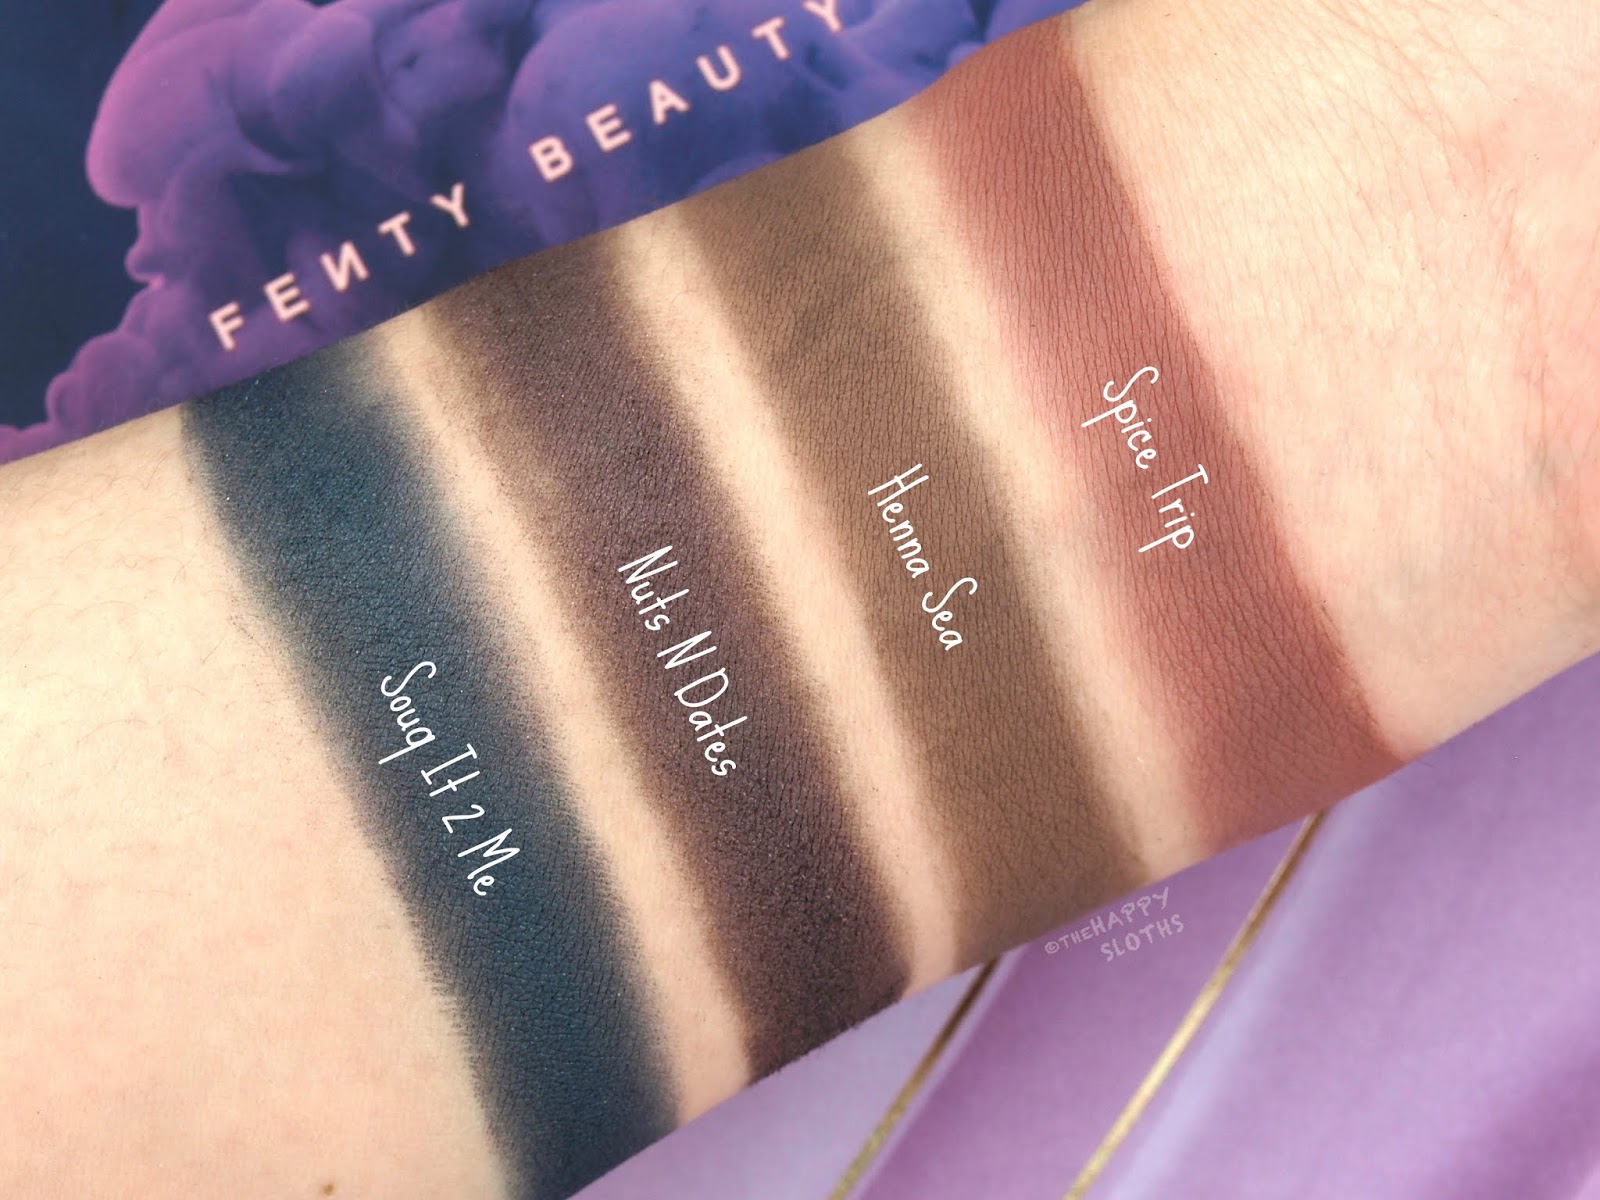 Fenty Beauty By Rihanna | Moroccan Spice Eyeshadow Palette: Review and Swatches